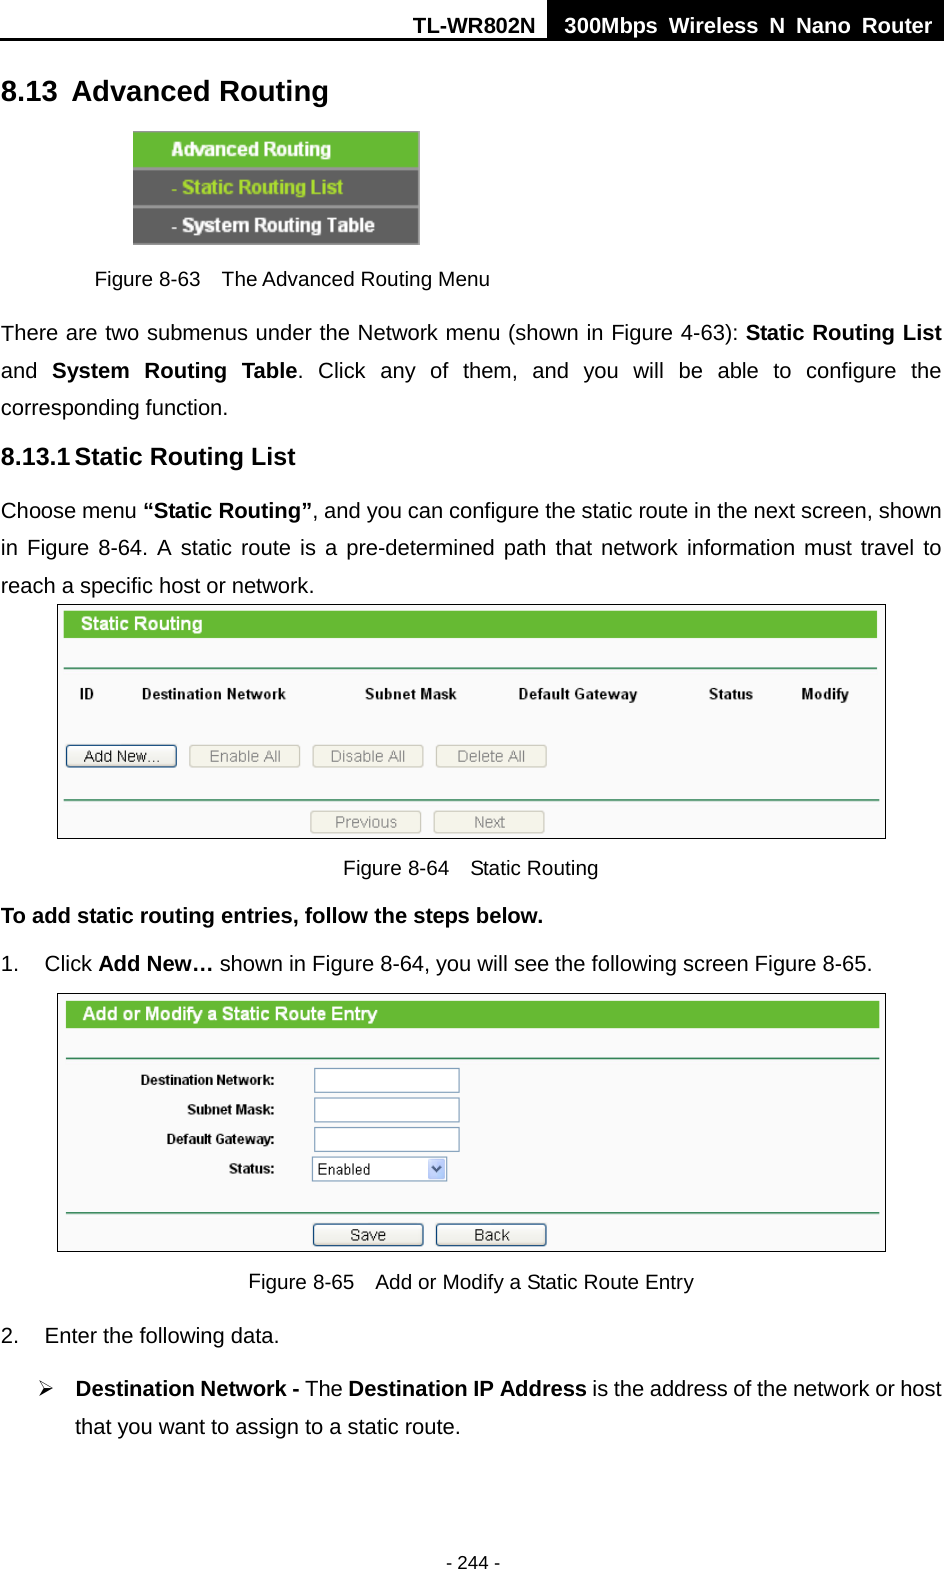 TL-WR802N  300Mbps Wireless N Nano Router  8.13 Advanced Routing  Figure 8-63  The Advanced Routing Menu There are two submenus under the Network menu (shown in Figure 4-63): Static Routing List and  System Routing Table.  Click any of them, and you will be able to configure the corresponding function. 8.13.1 Static Routing List Choose menu “Static Routing”, and you can configure the static route in the next screen, shown in Figure 8-64. A static route is a pre-determined path that network information must travel to reach a specific host or network.  Figure 8-64  Static Routing To add static routing entries, follow the steps below. 1. Click Add New… shown in Figure 8-64, you will see the following screen Figure 8-65.    Figure 8-65  Add or Modify a Static Route Entry 2. Enter the following data.  Destination Network - The Destination IP Address is the address of the network or host that you want to assign to a static route. - 244 - 